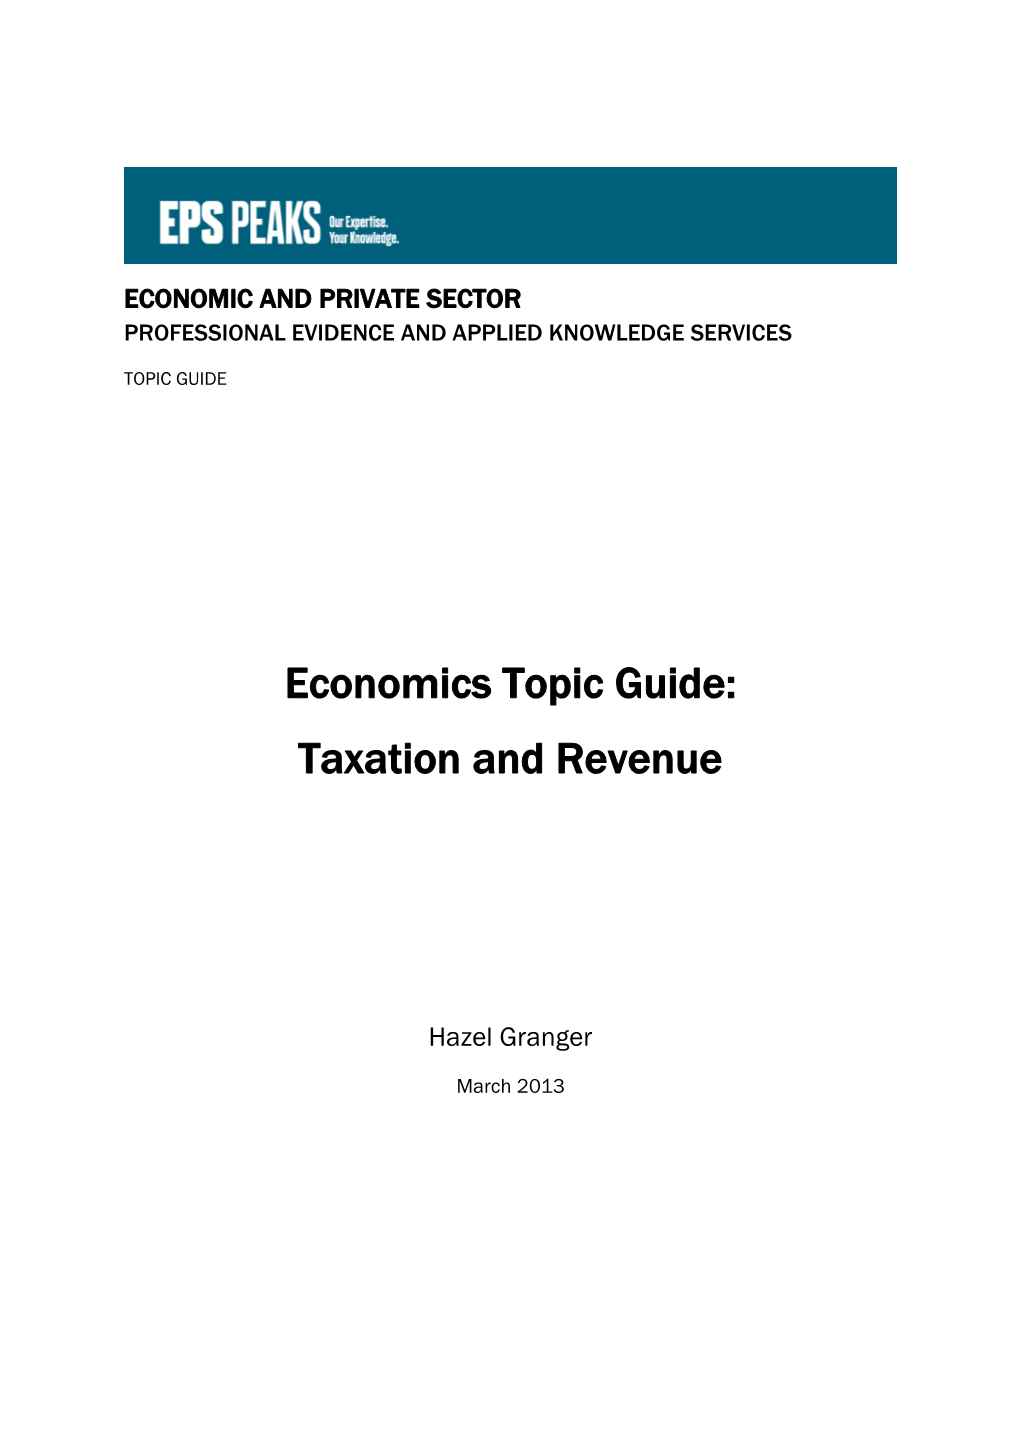 Revenue Function Topic Guide: Contents